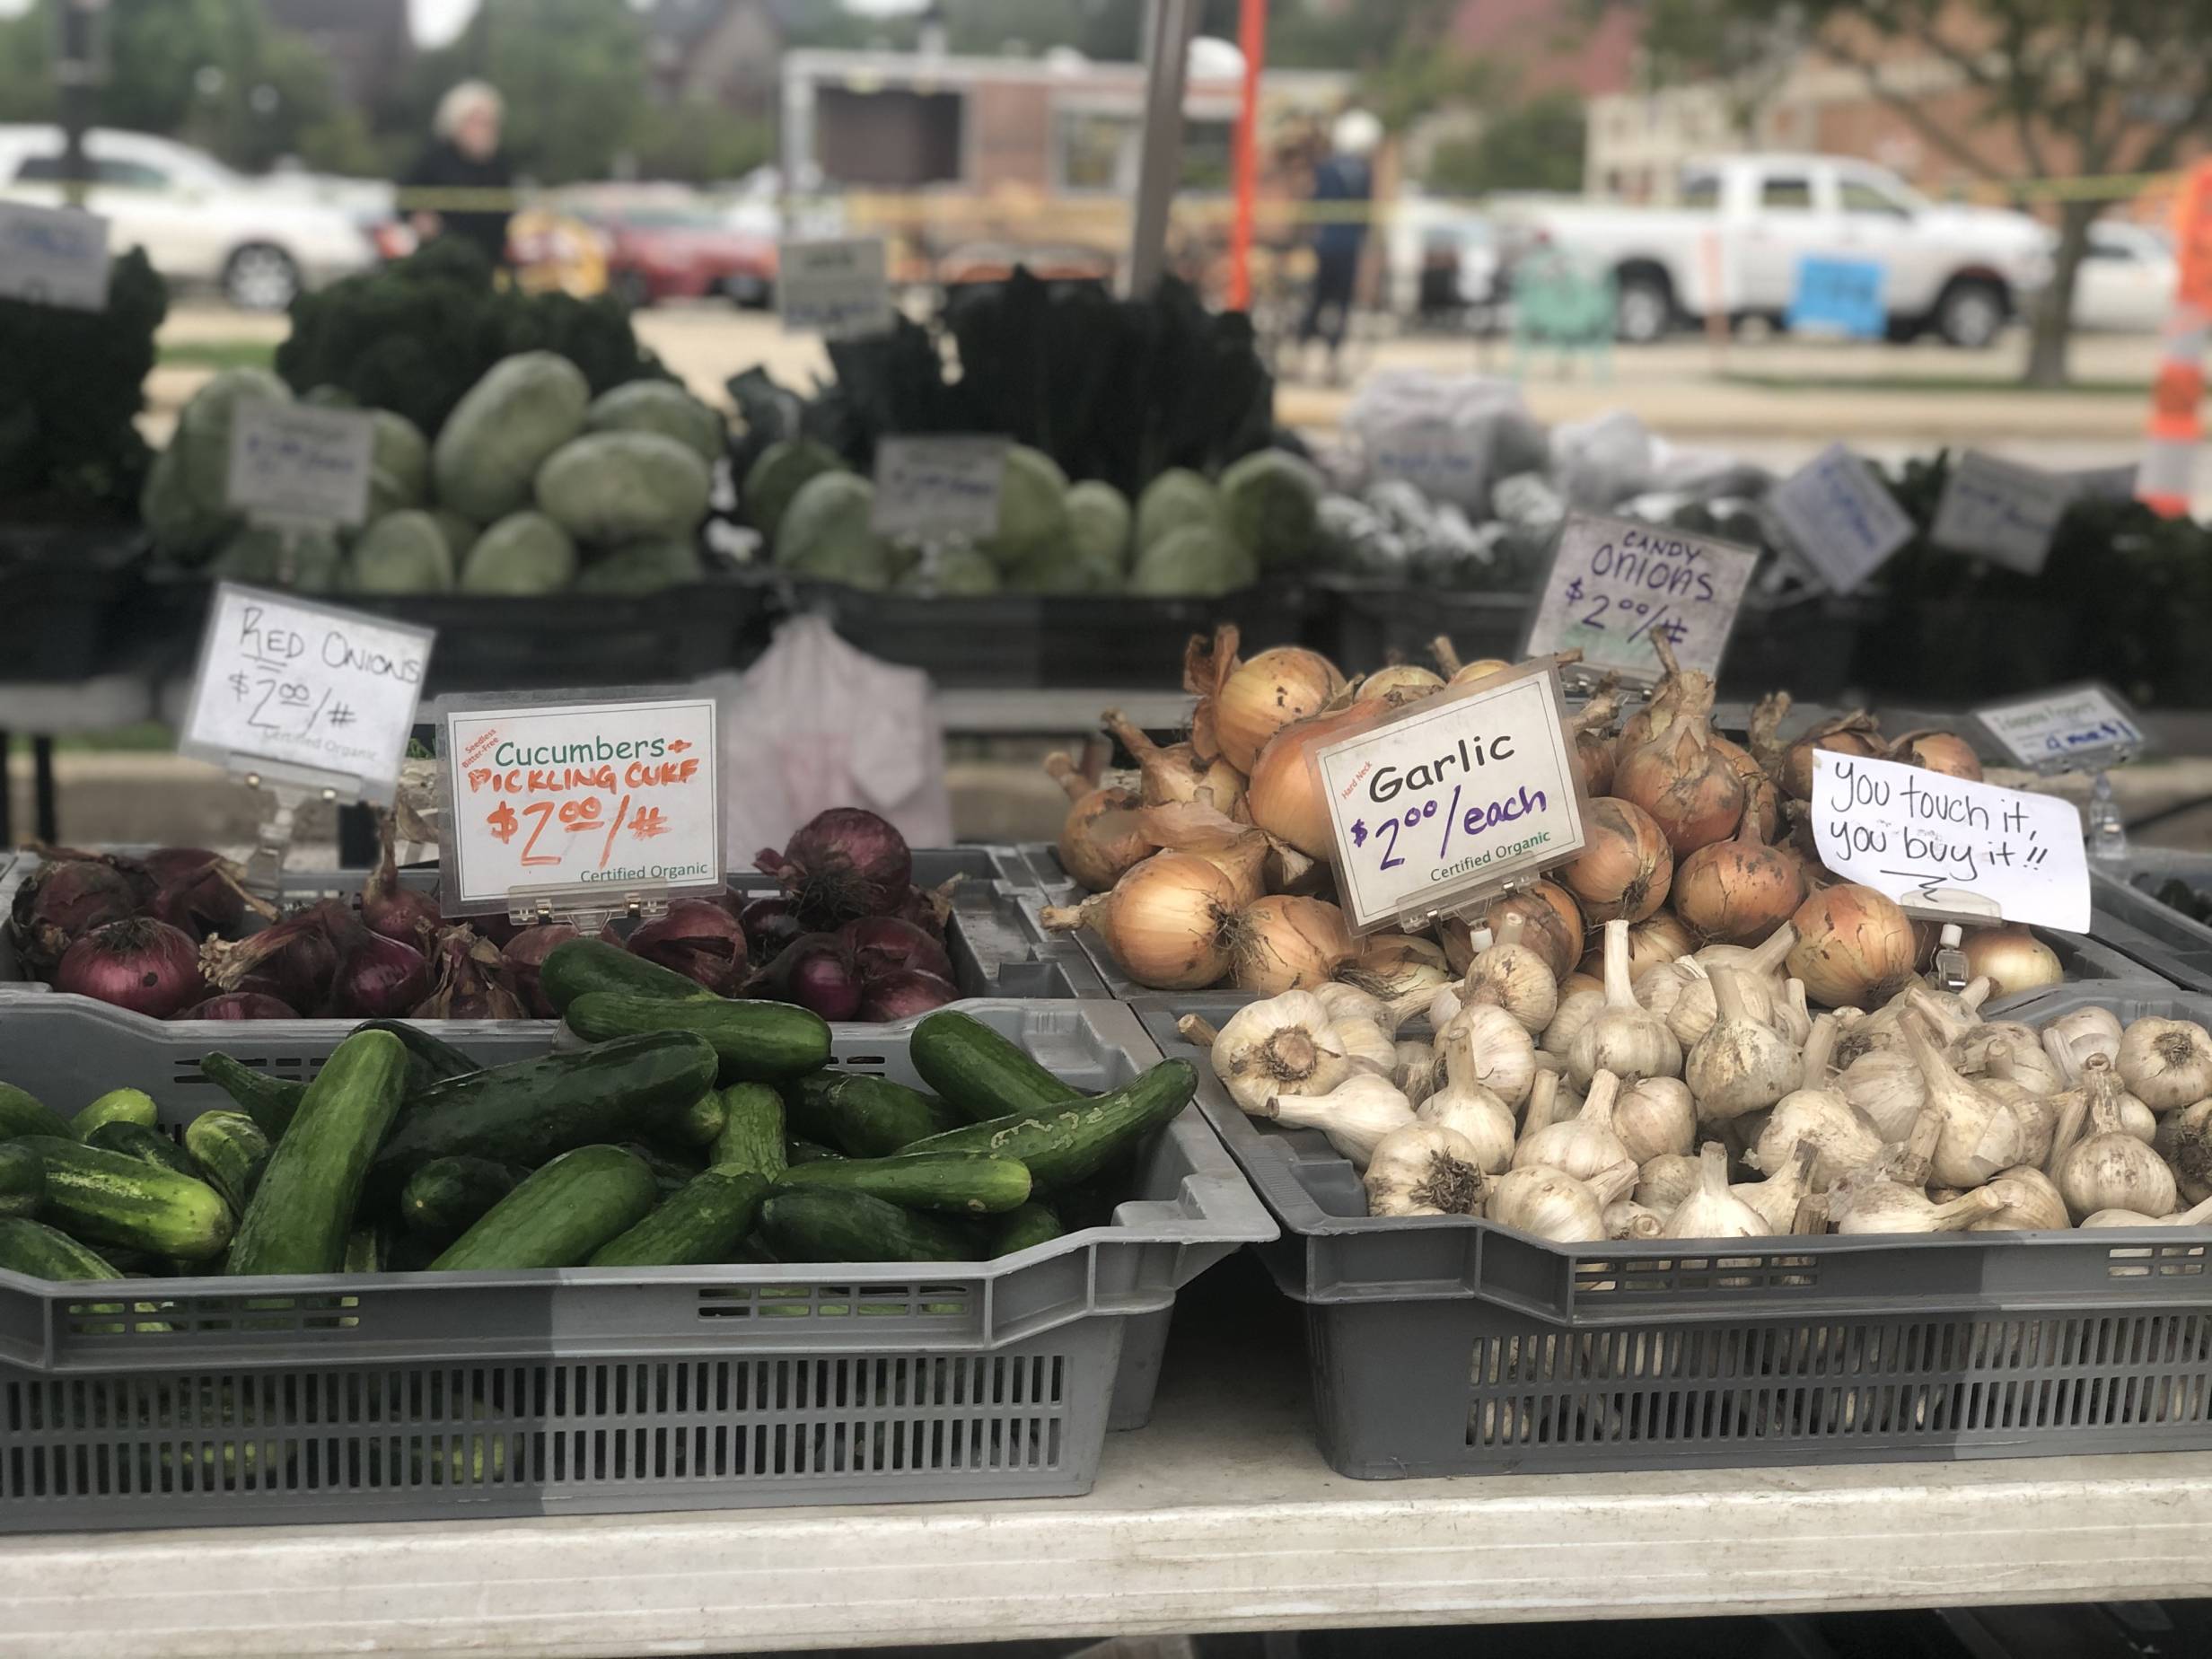 Pickling cucumbers, red onions, white onions, and garlic sit in gray trays on a table at the Urbana Market in the Square. Photo by Alyssa Buckley.